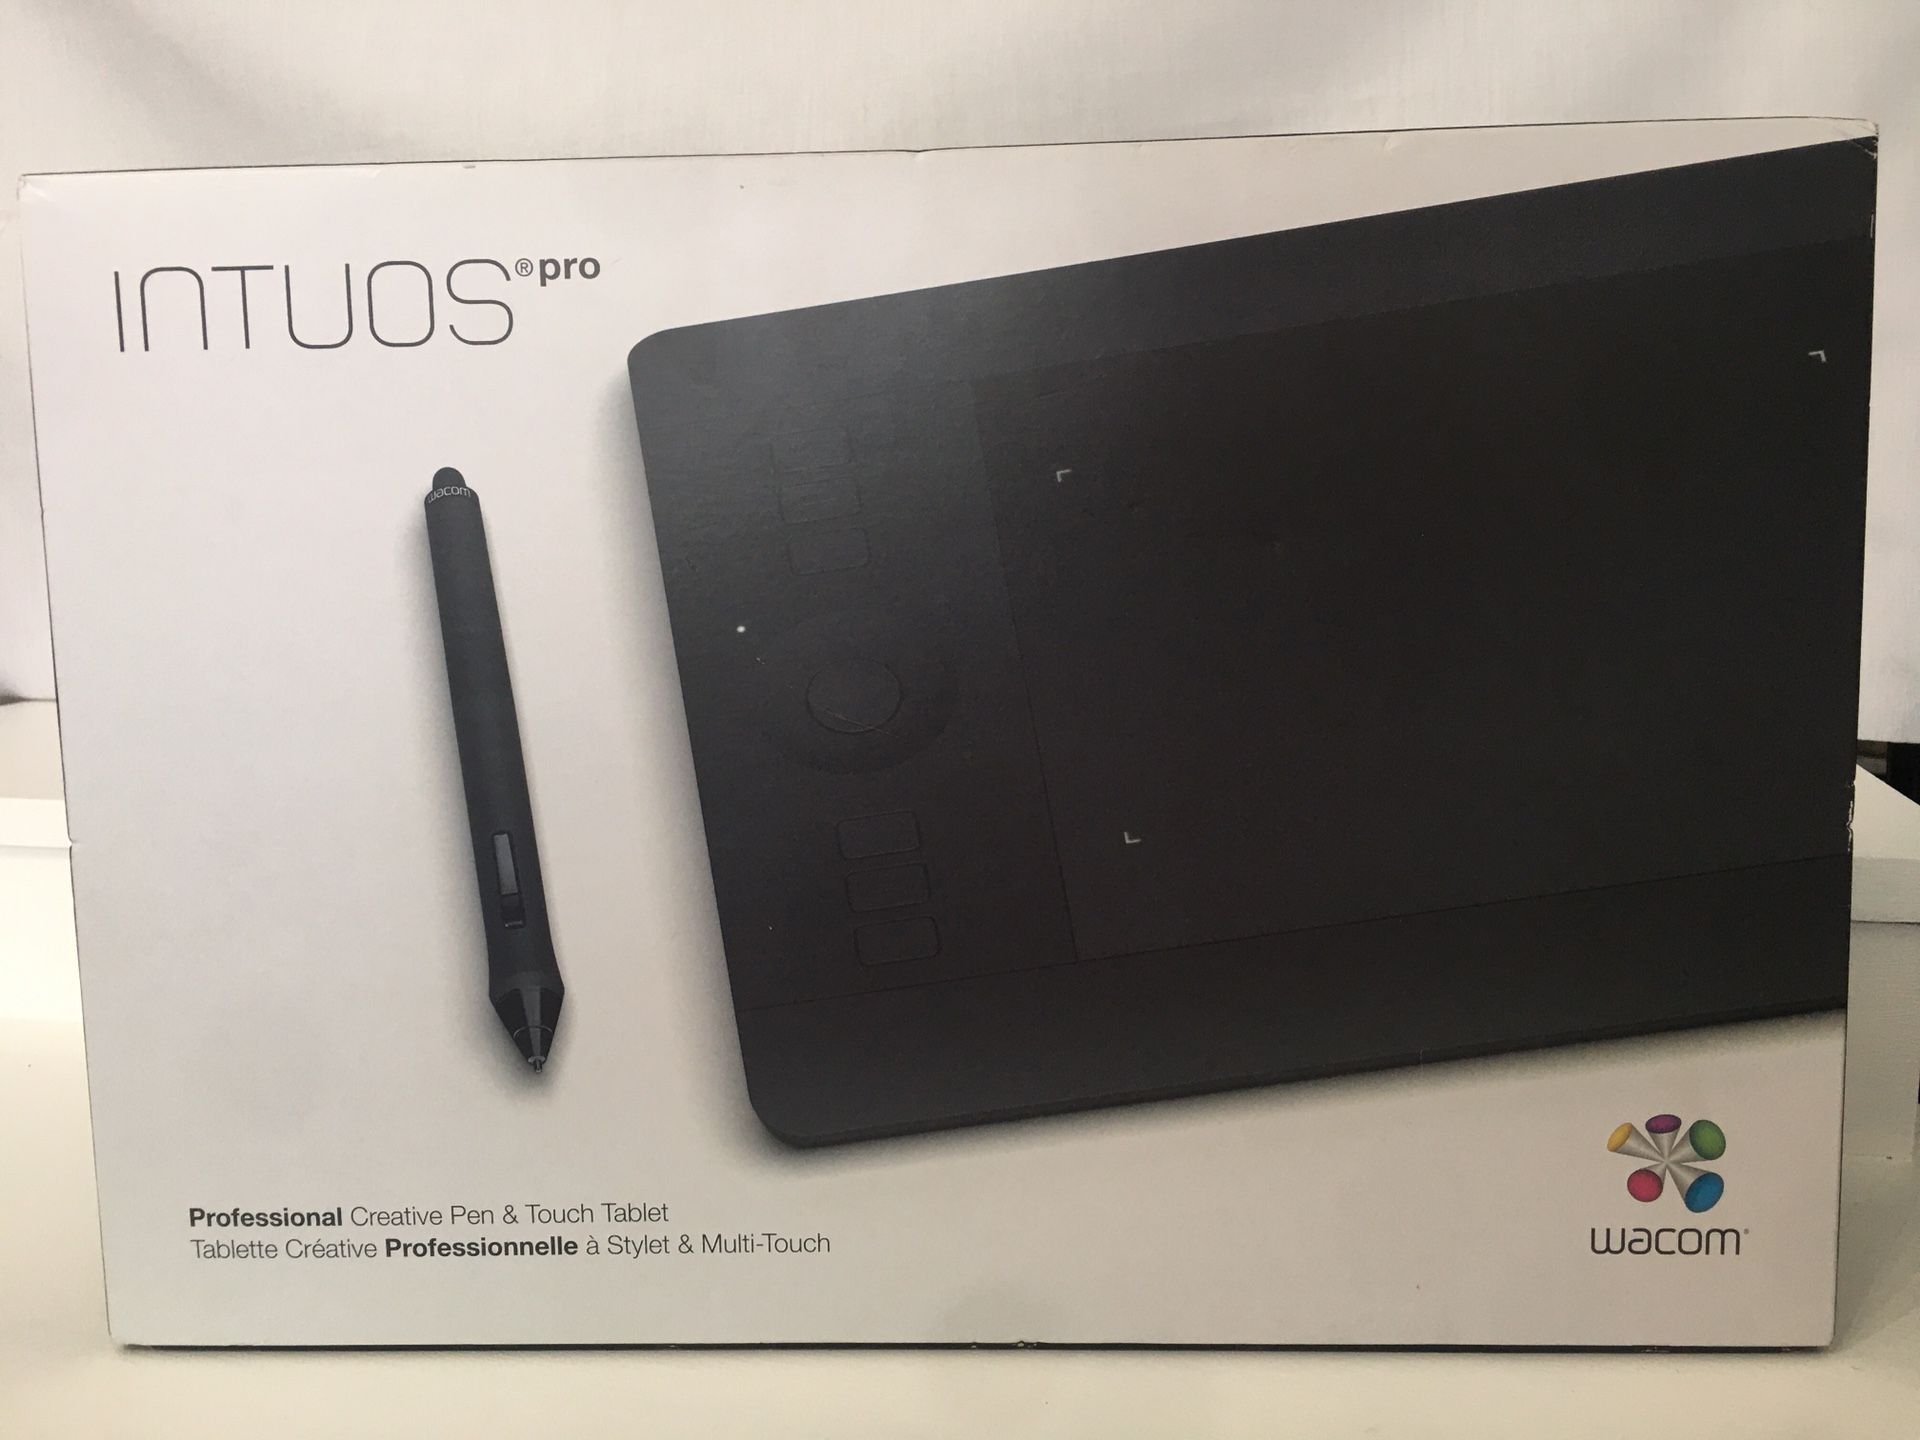 NEW Wacom PTH451 SMALL Intuos Pro Professional Pen & Touch Tablet - Black SEALED BOX